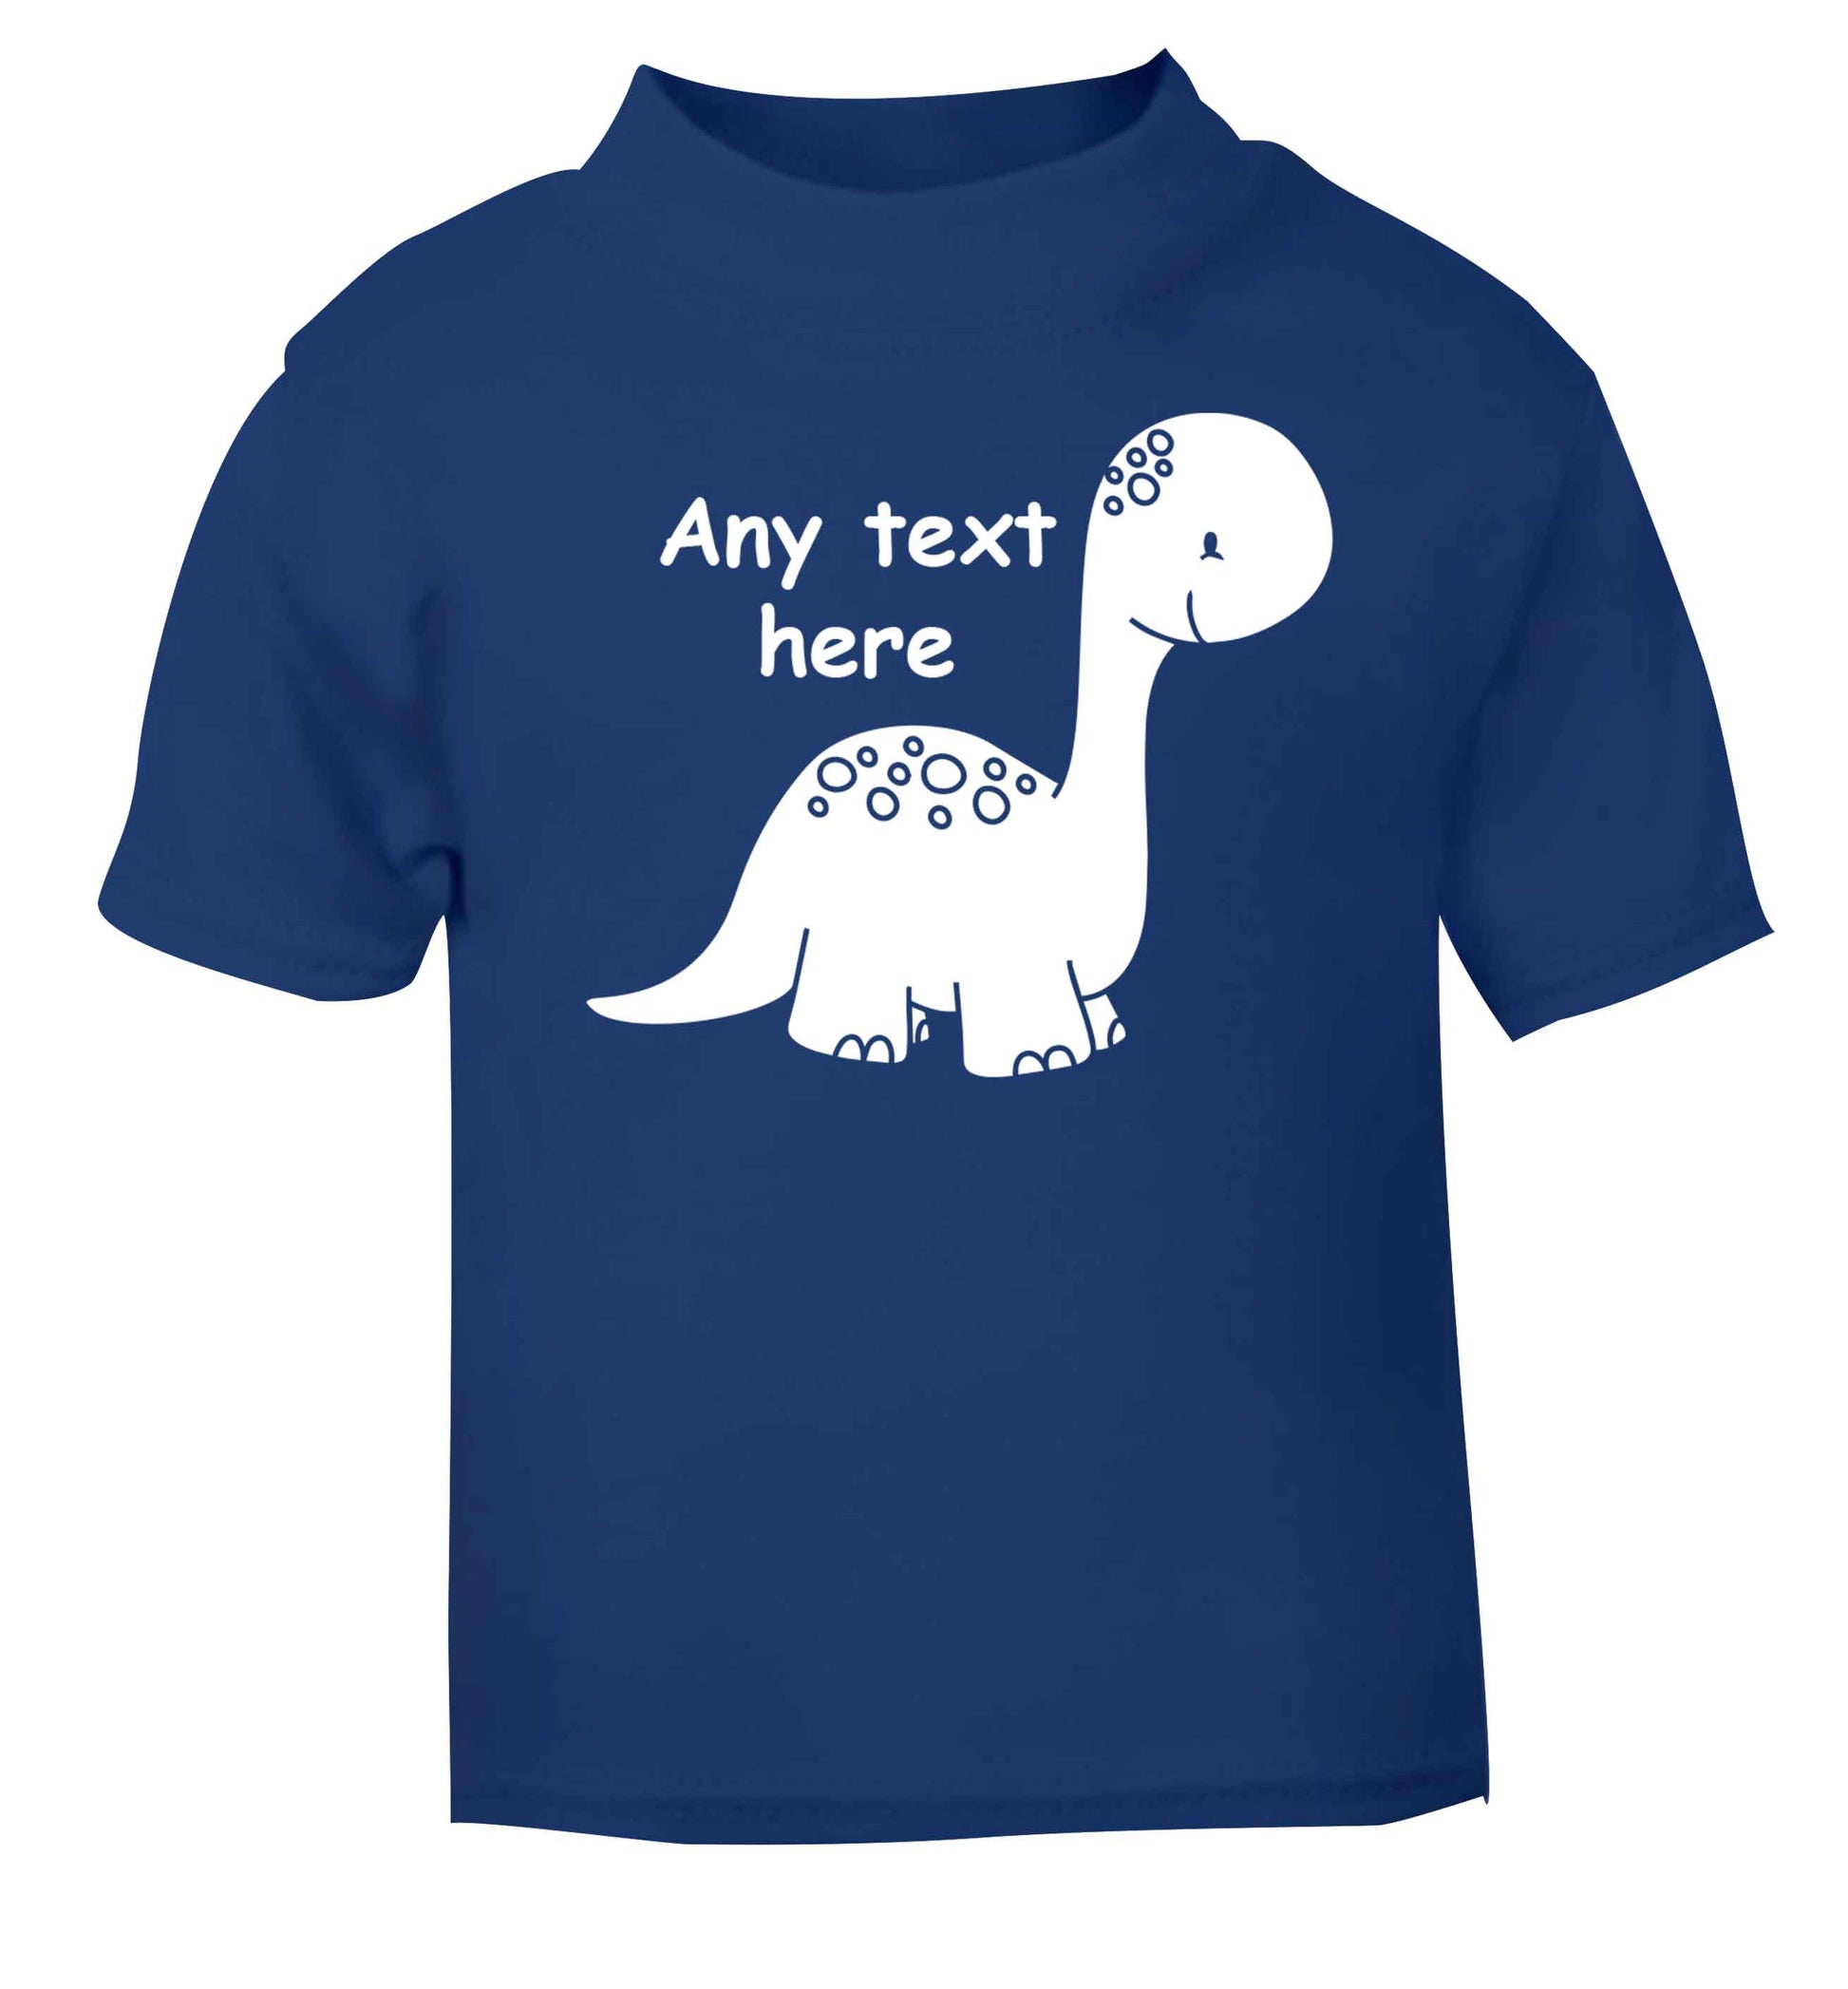 Dinosaur any text blue baby toddler Tshirt 2 Years